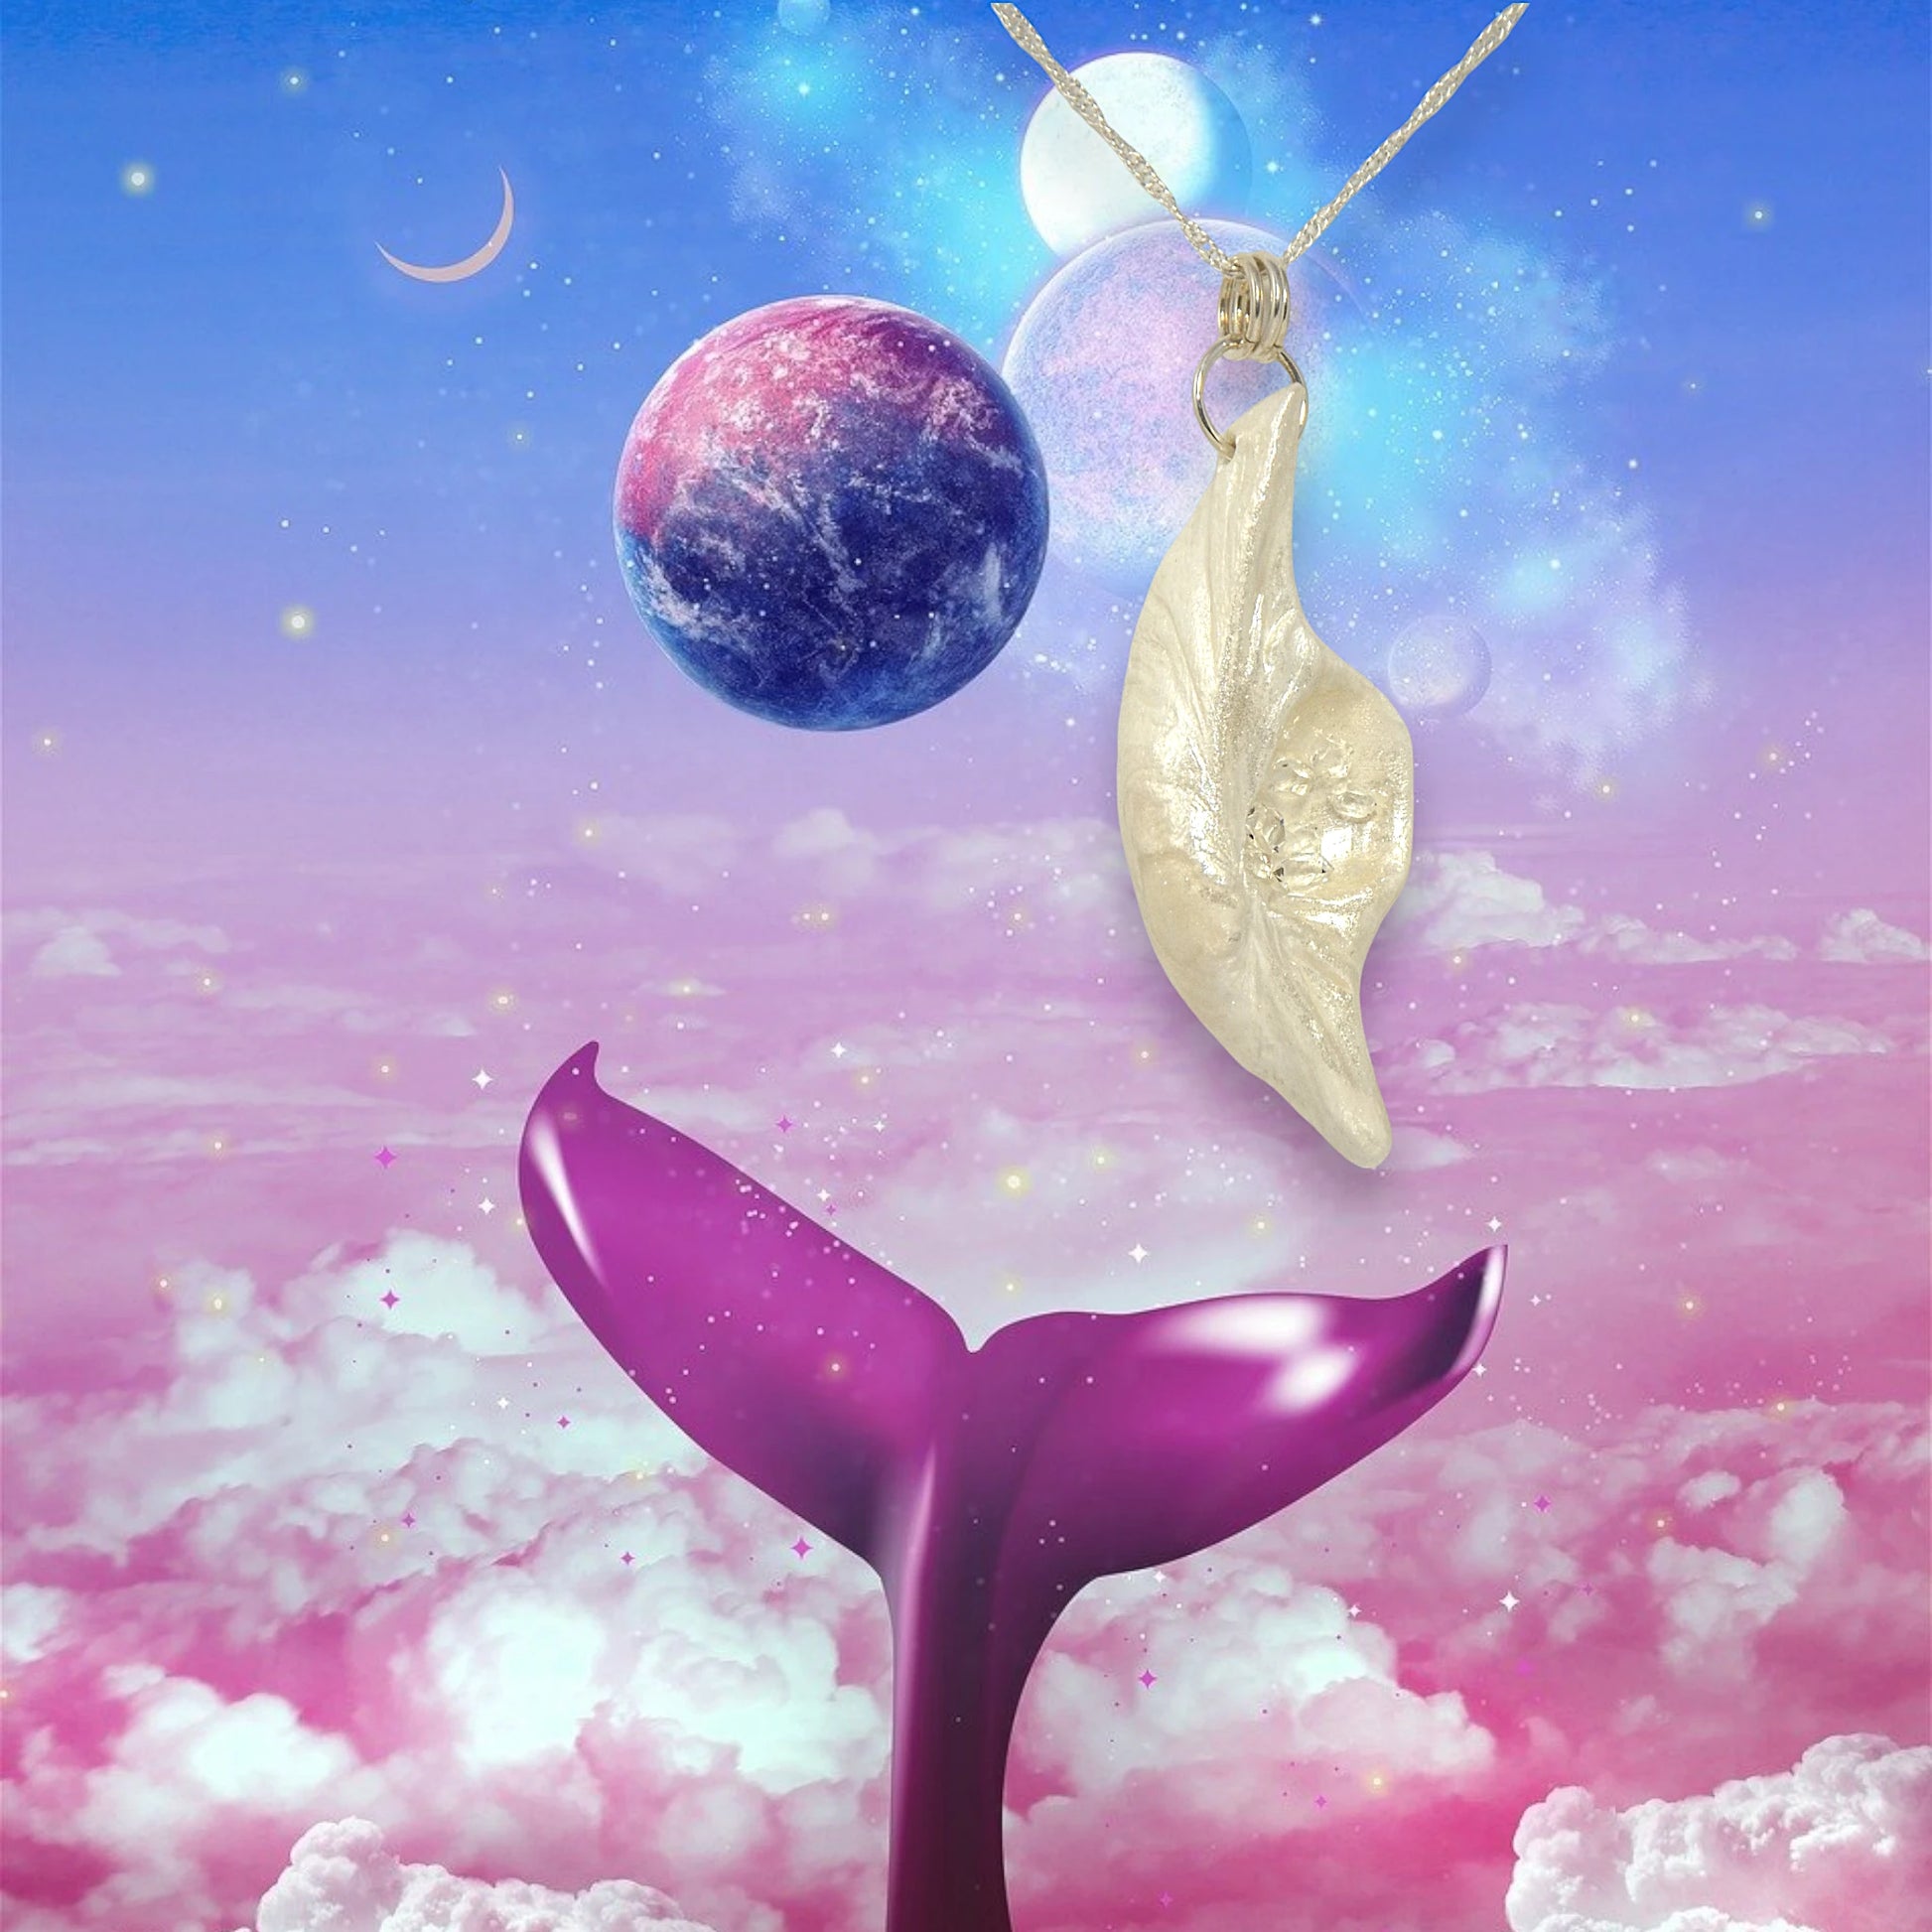 Beautiful pendant called Clarity.  Clarity is a natural seashell from the beach of Vancouver island.with seven herkimer diamonds. The pendant is hanging by a chain on the right side of the image.  The background is a perwinkle bluesky with moons, and planets.  Pink clouds and a purple whale tail.